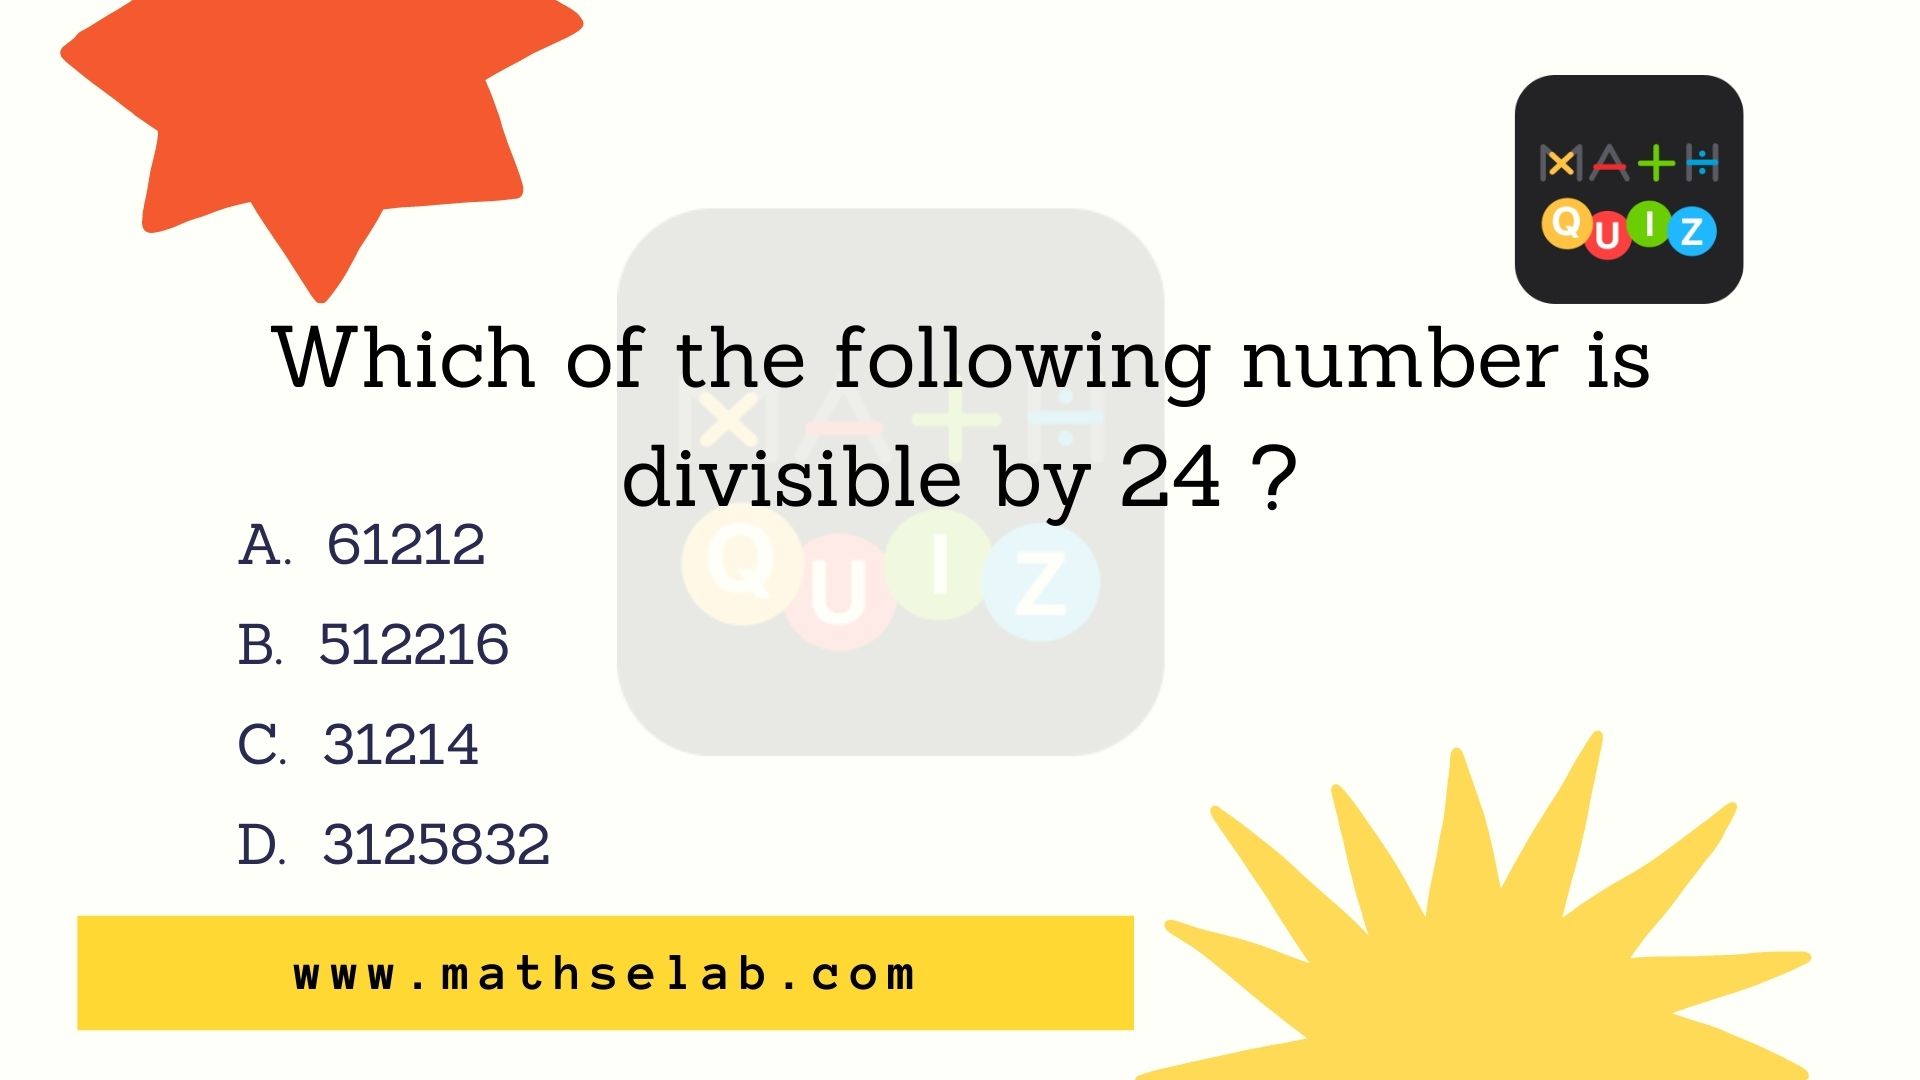 Which of the following number is divisible by 24 ?